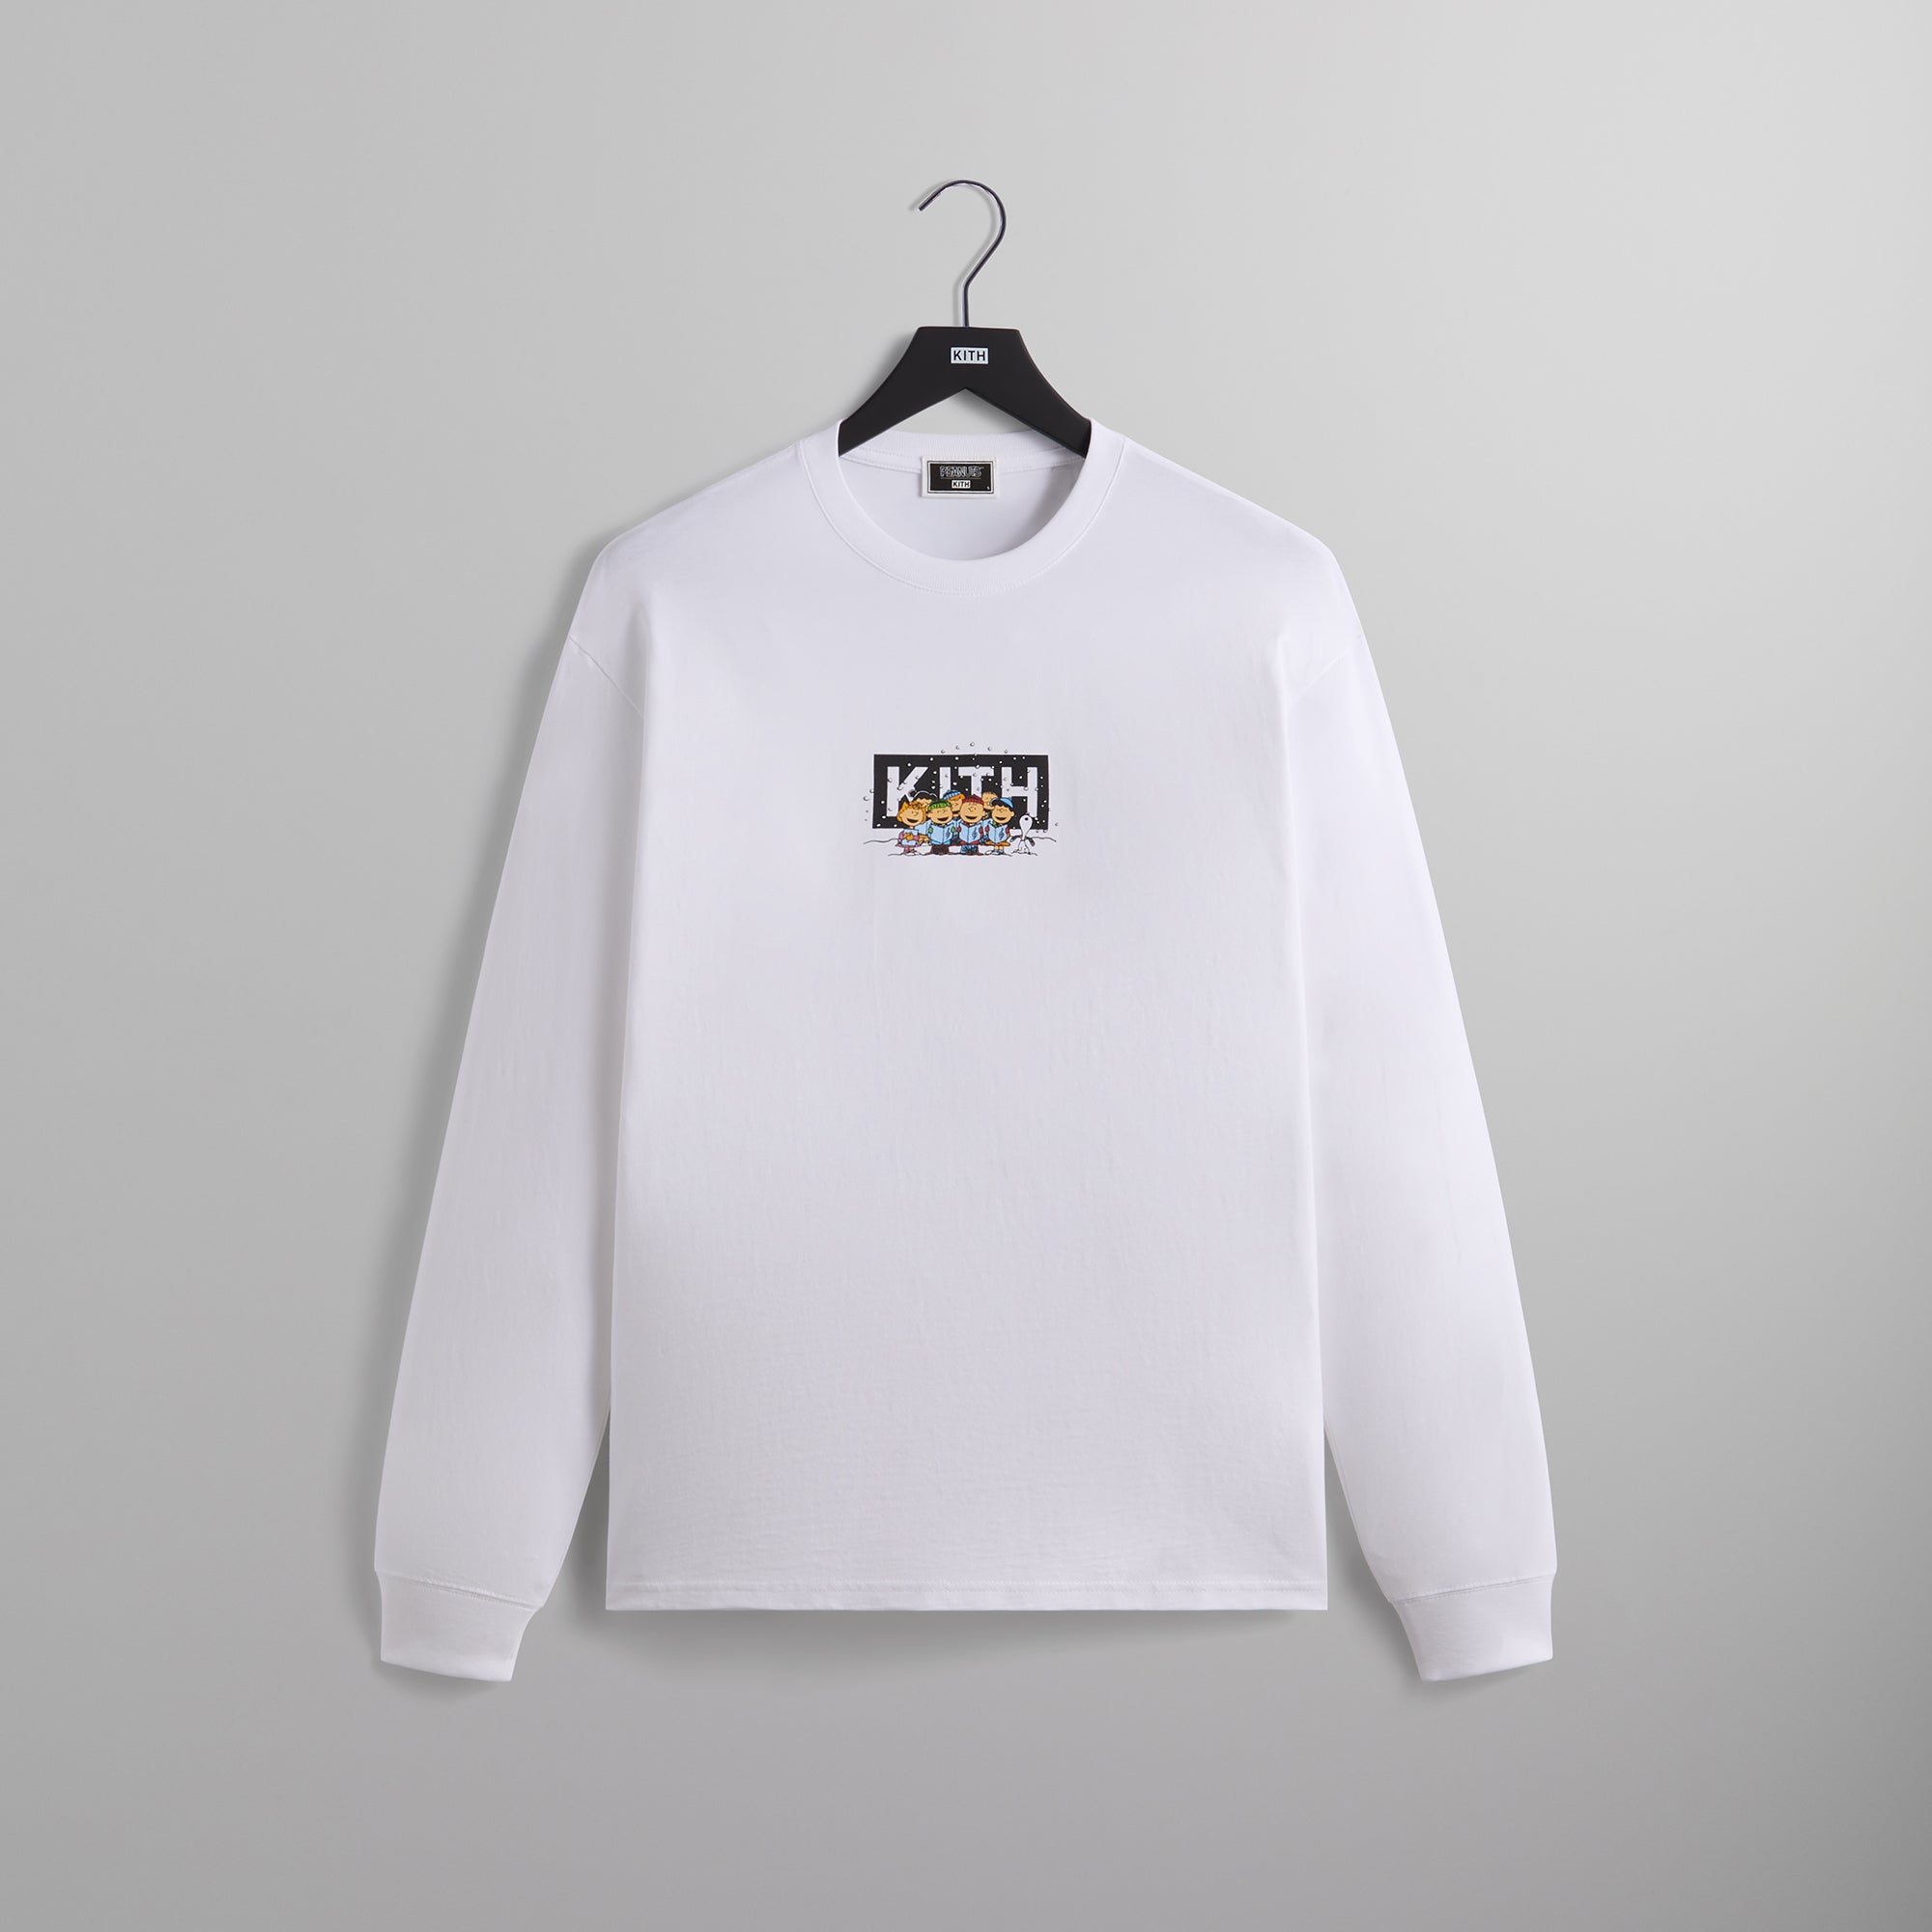 Kith for Peanuts DOGHOUSE TEE店頭購入品